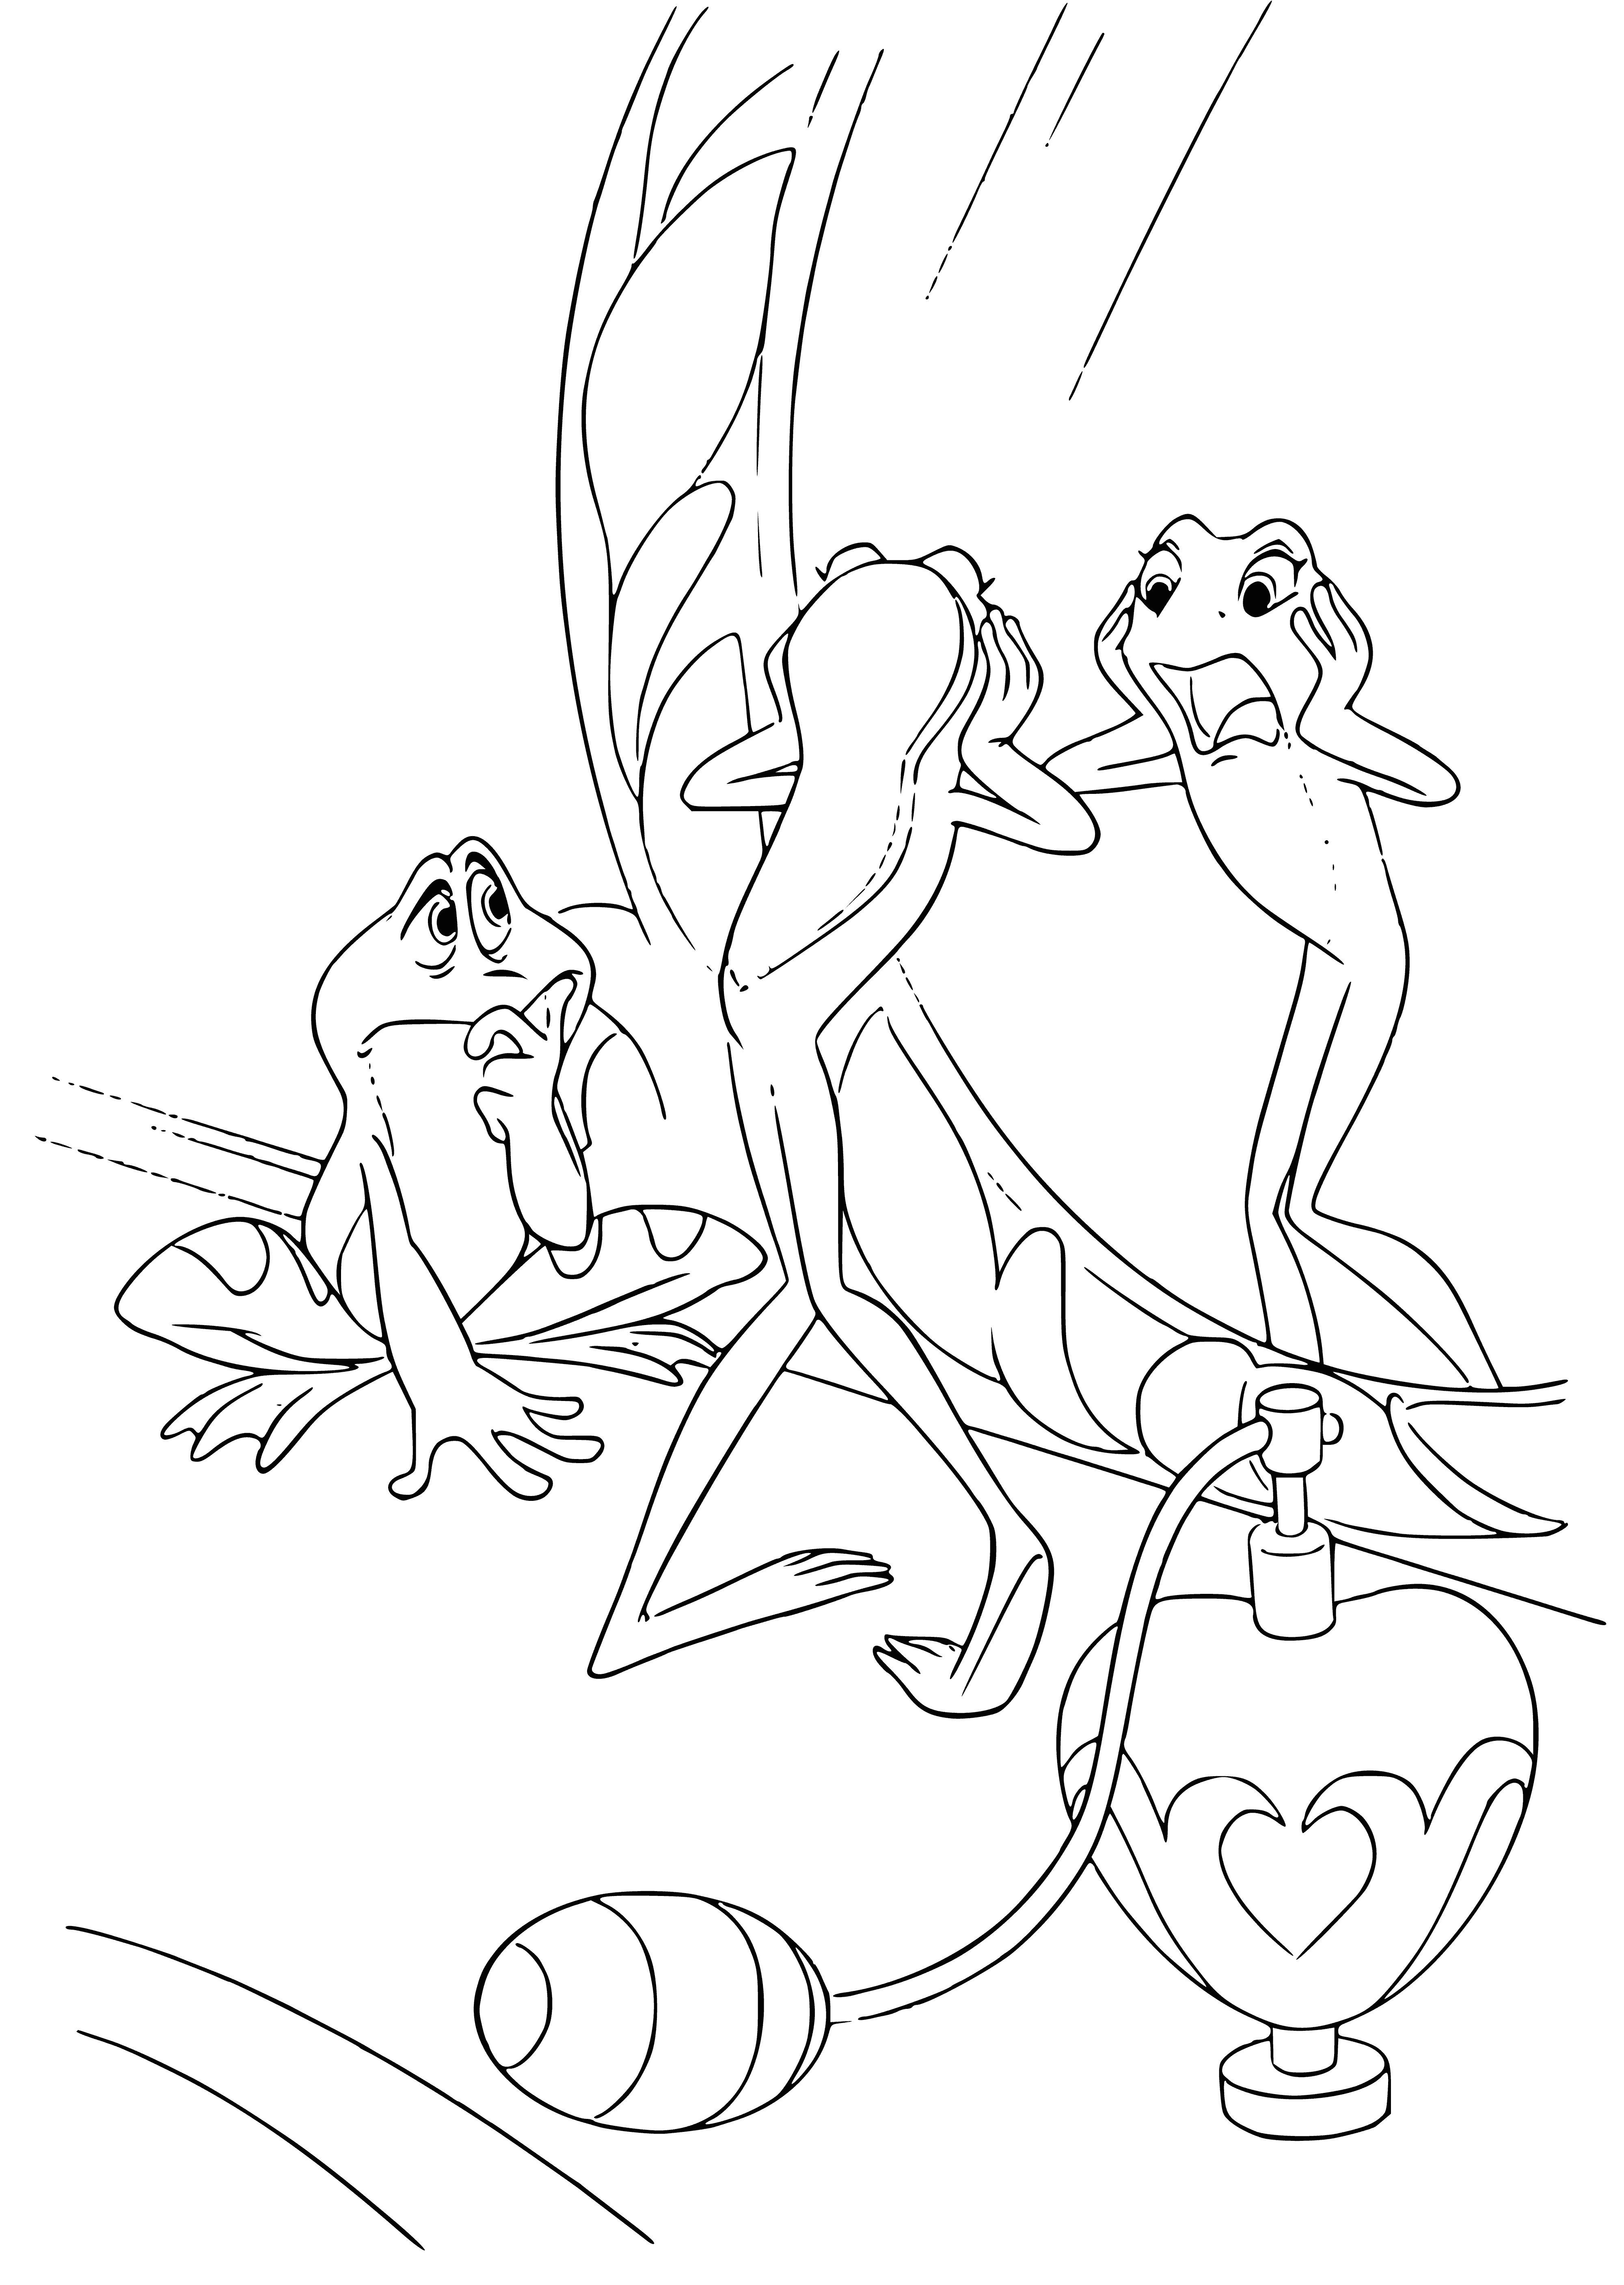 Tiana turned into a frog coloring page